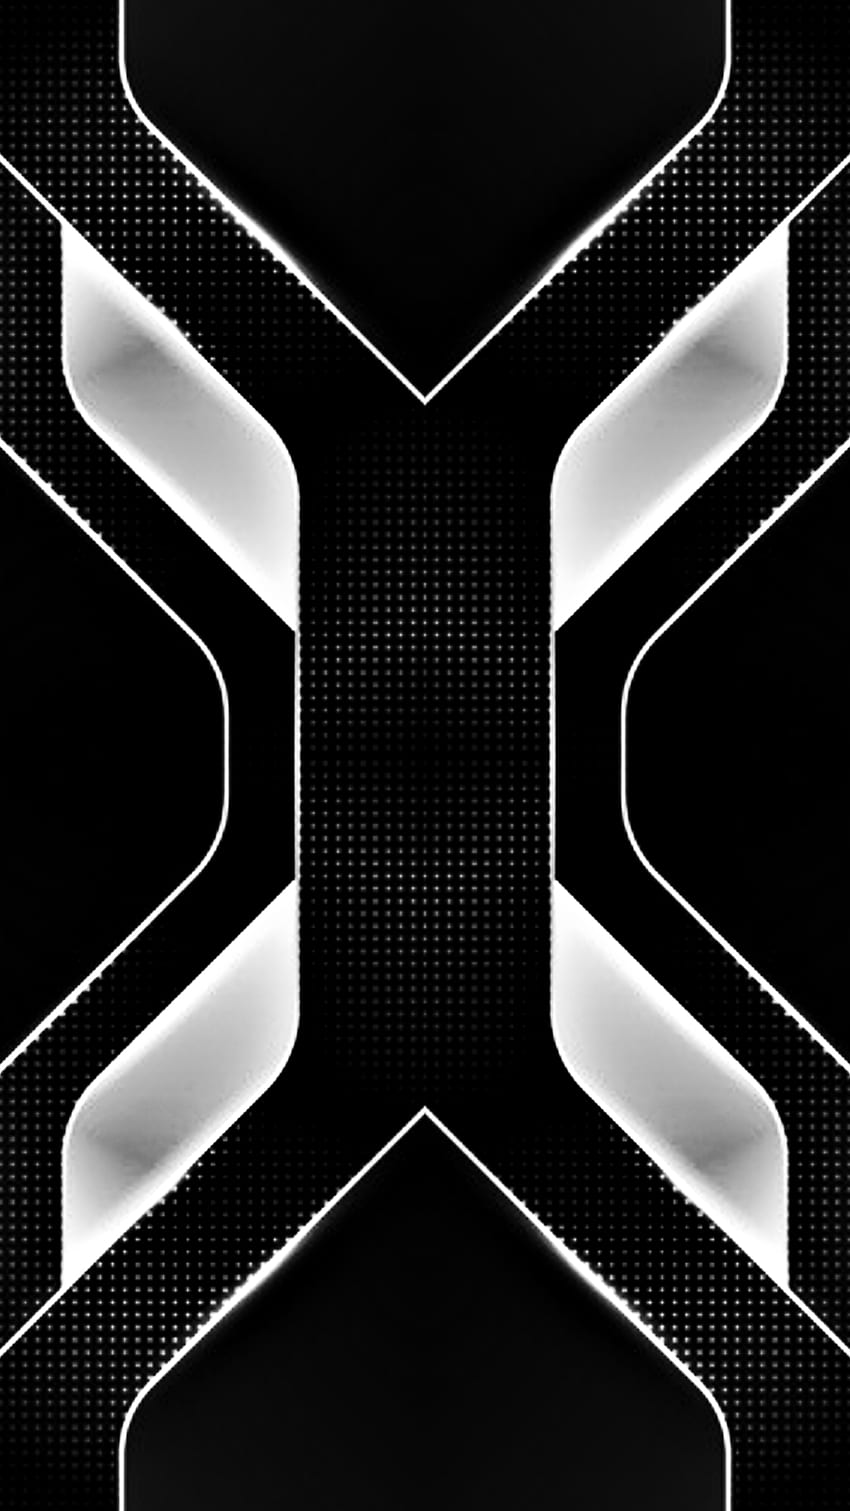 fdsgjhk, digital, new, symbol, neon, texture, android, black, oled, pattern, abstract, iphone, plus, 3d, amoled, gray, material, modern, white, mate, , design, geometric, shiny HD phone wallpaper